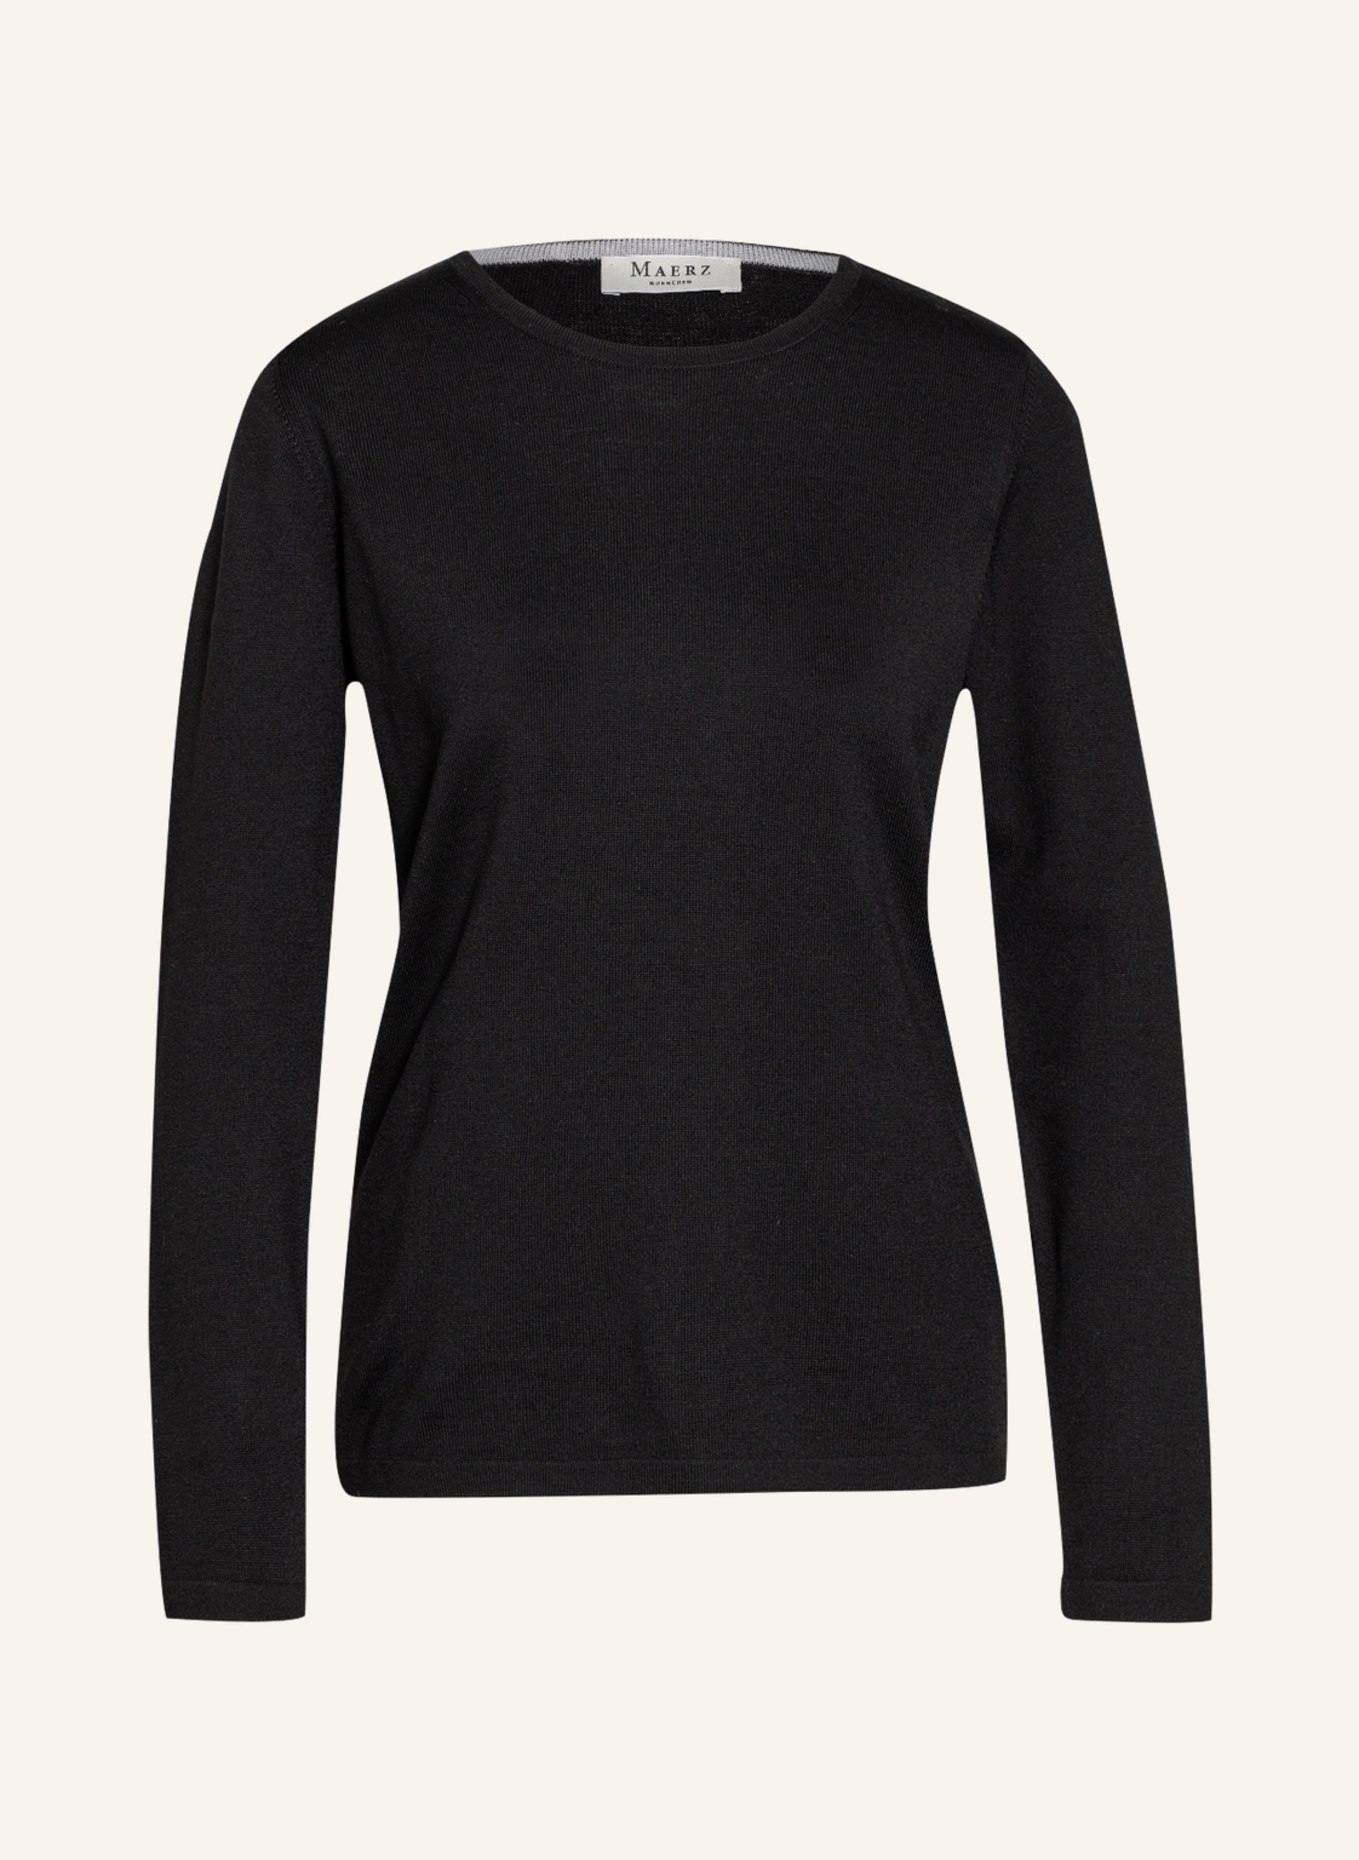 MAERZ MUENCHEN Sweater , Color: BLACK (Image 1)